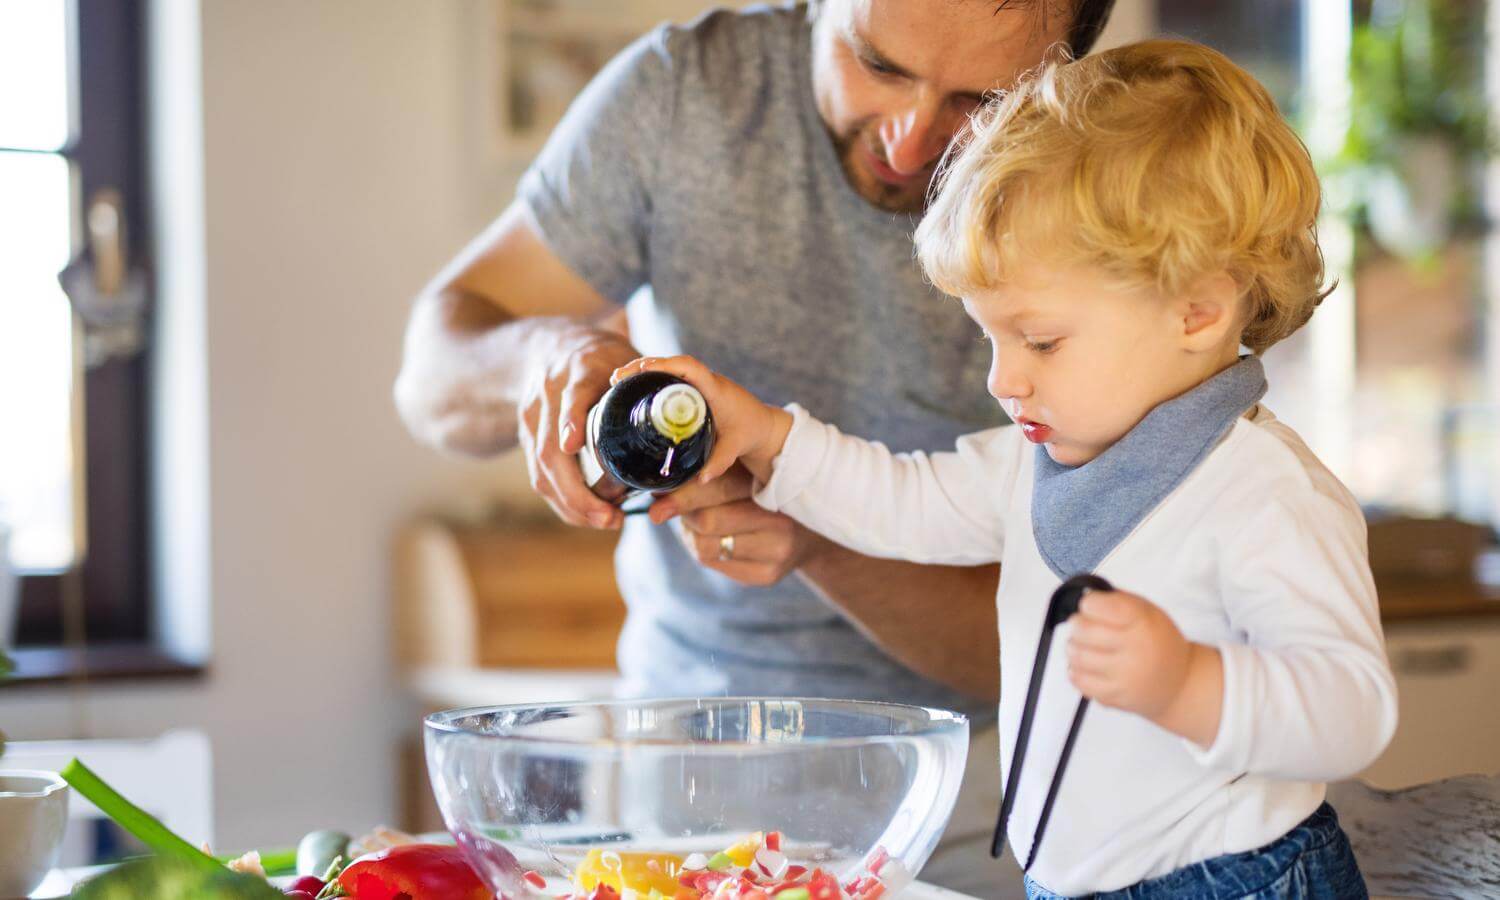 Father figure with young blonde child pour olive oil into bowl of vegetables